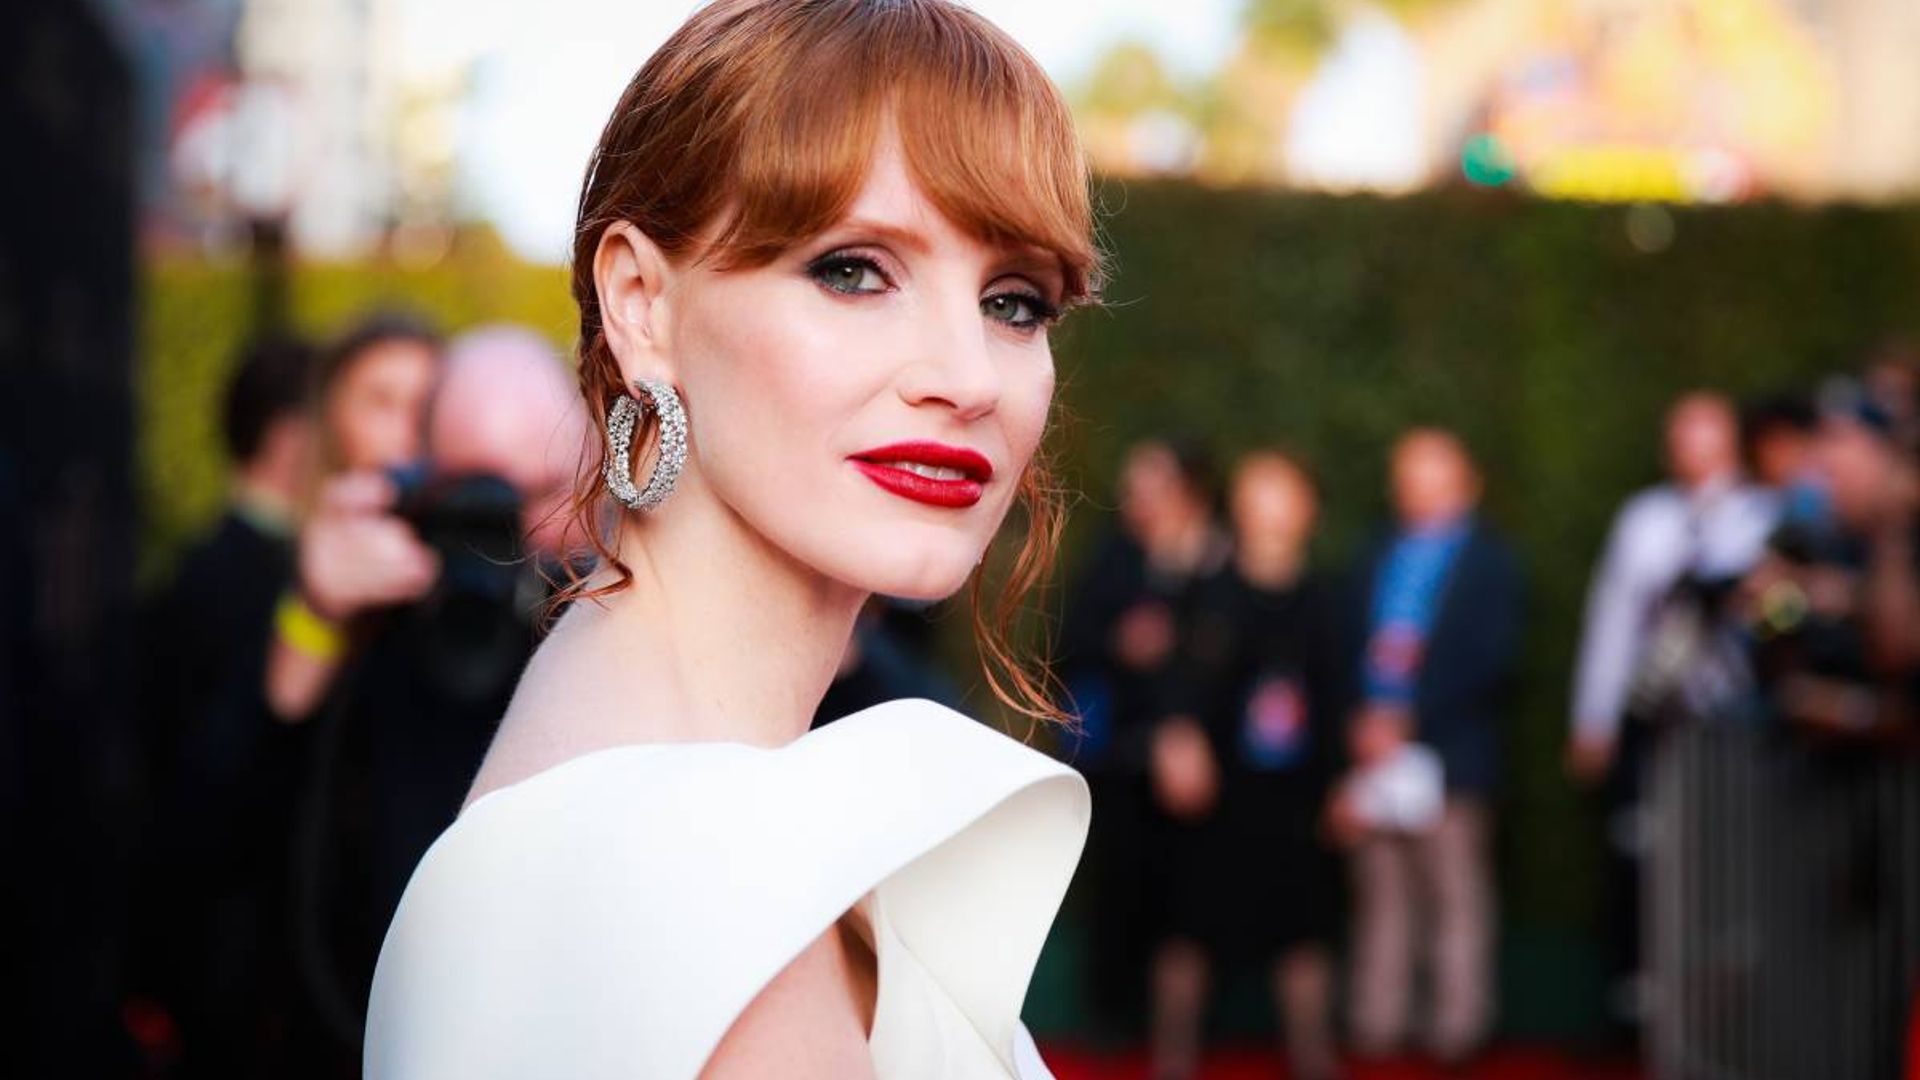 Everyone is falling in love with Jessica Chastain’s heart-topped sweater